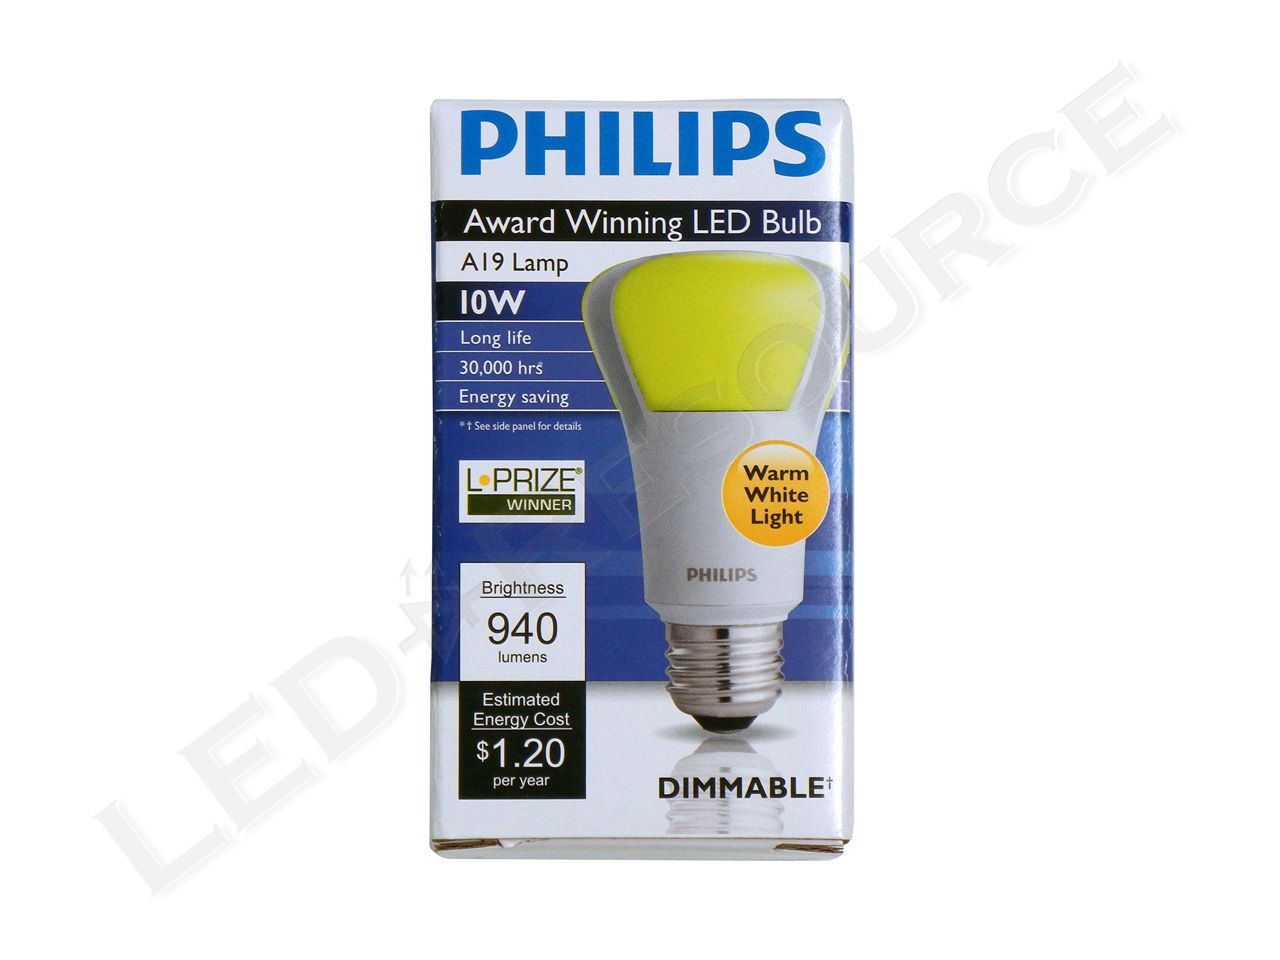 voering badminton Aap Philips L-Prize Award Winning LED Bulb Review - LED-Resource